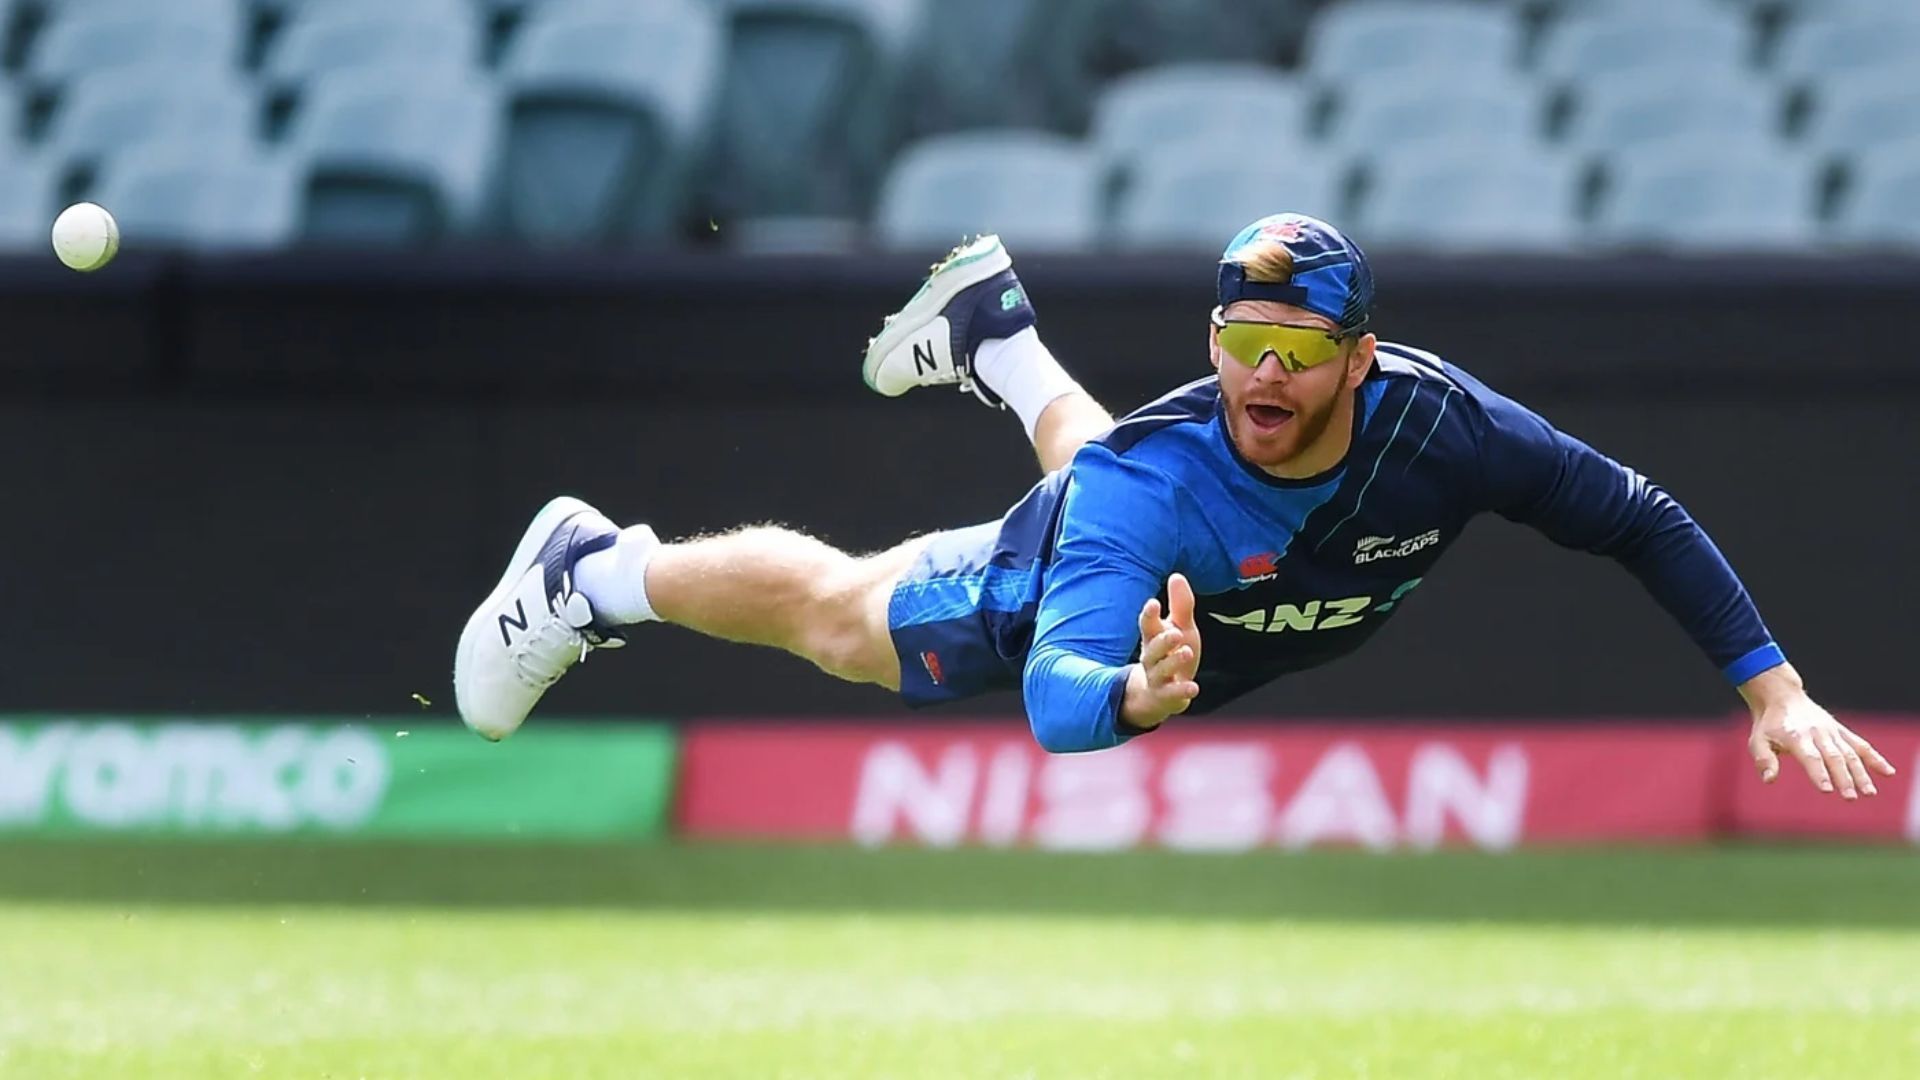 Glenn Phillips is one of the best fielders in world cricket right now. (Image Courtesy: espncricinfo.com)